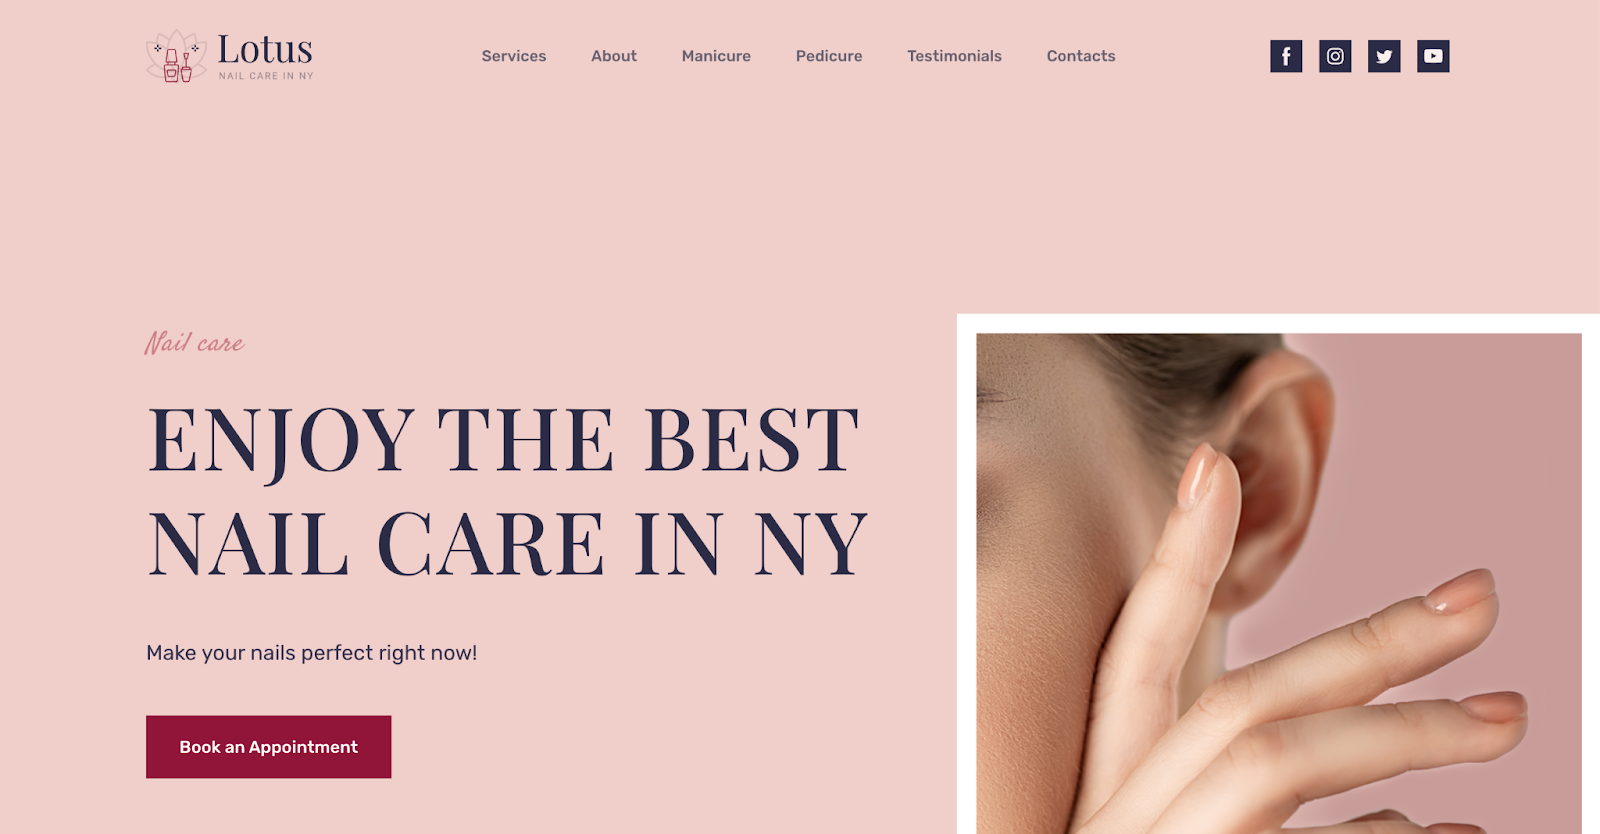 Best nail salon websites, example from Lotus.